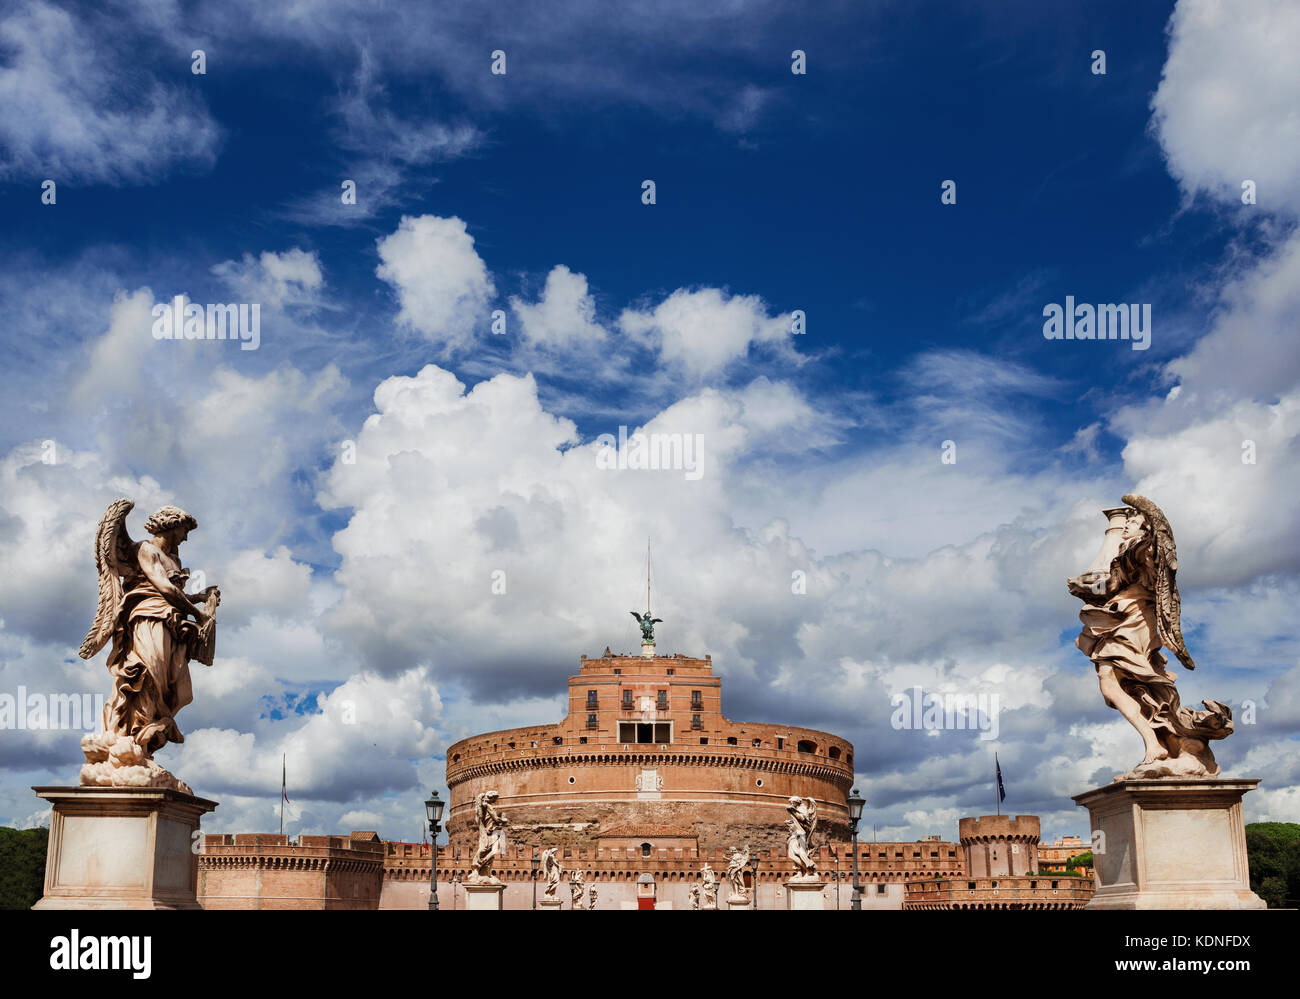 Castel Sant'Angelo (Castle of the Holy Angel) in the center of Rome with beautiful baroque angel statues and clouds Stock Photo